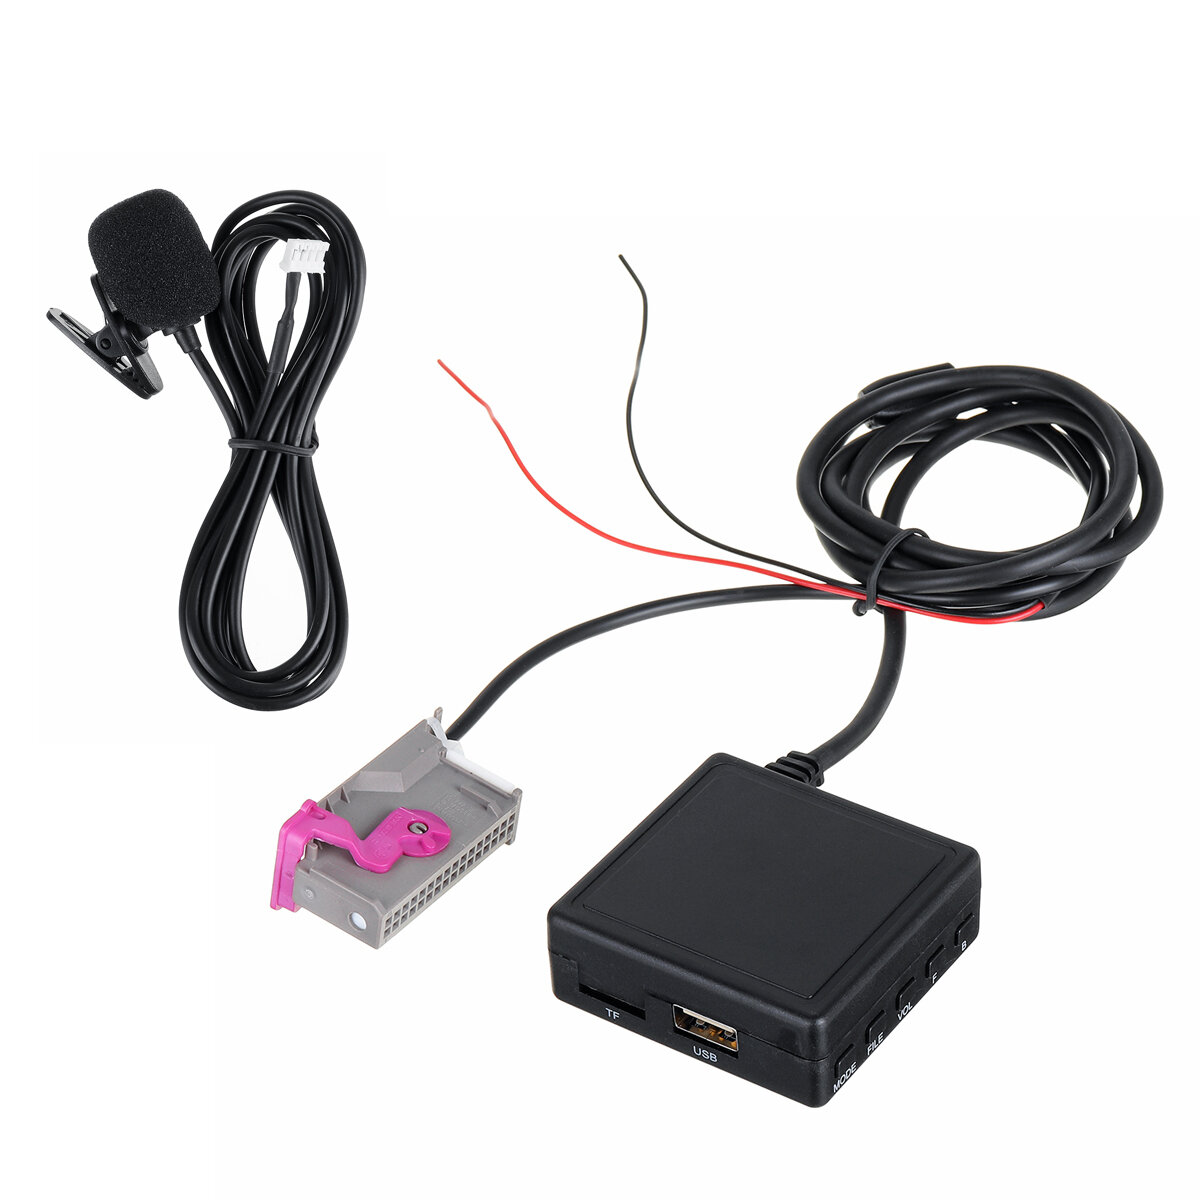 AUX-audiokabeladapter TF USB met Bluetooth-microfoon voor Audi A3 A4 A6 TT R8 A8 voor Lamborghini vo